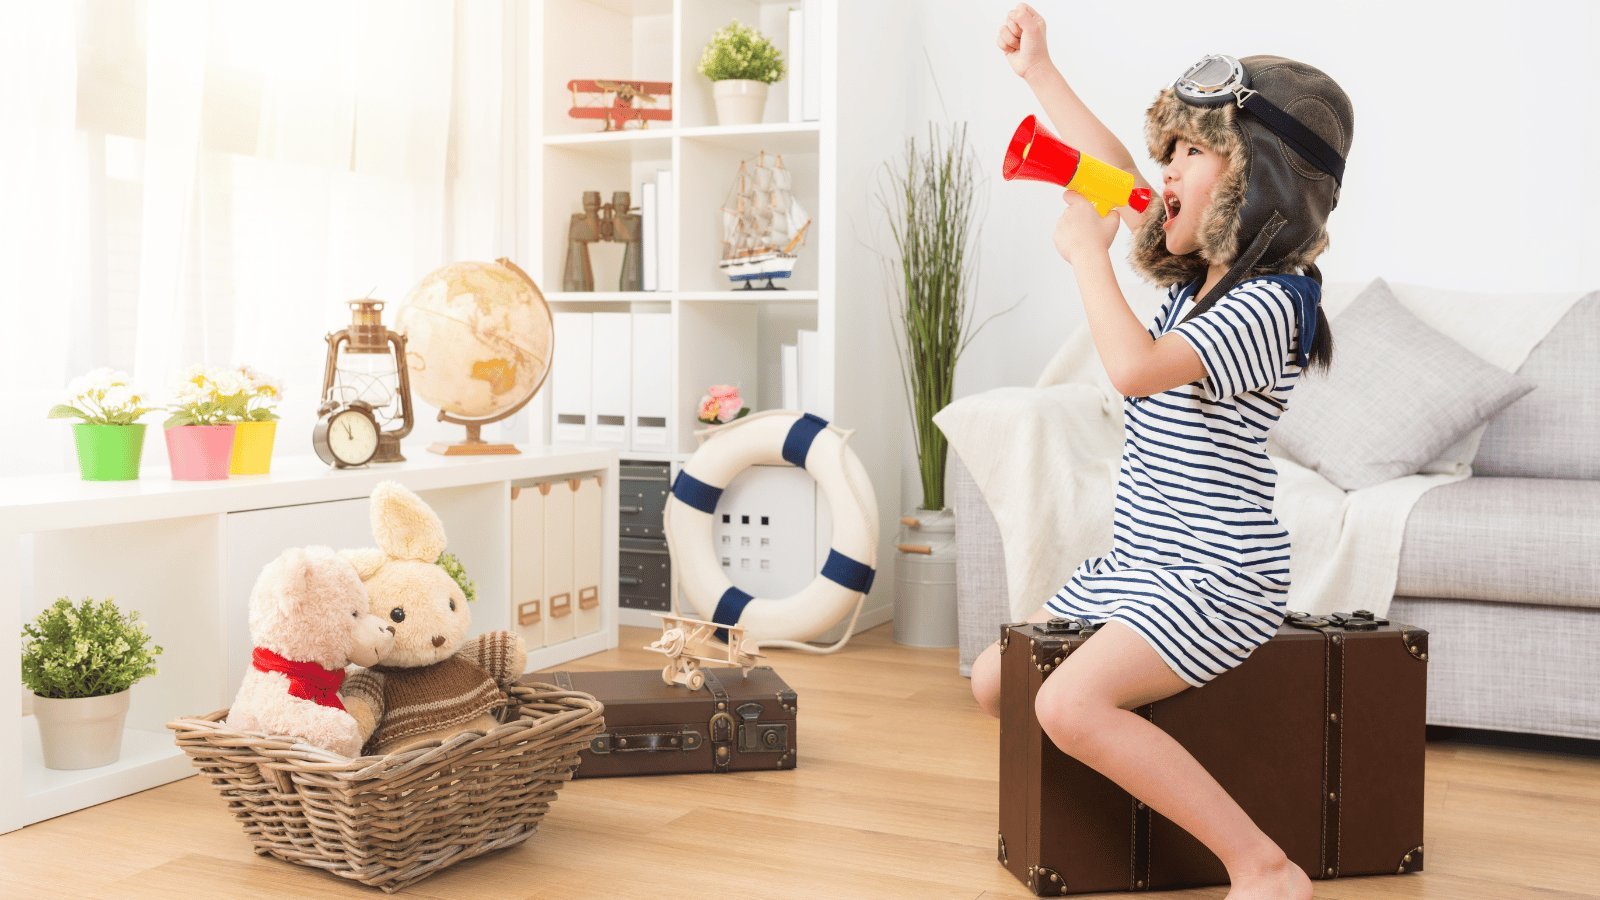 How to Use Pretend Play to Build Imagination, Creativity, and Self-Expression